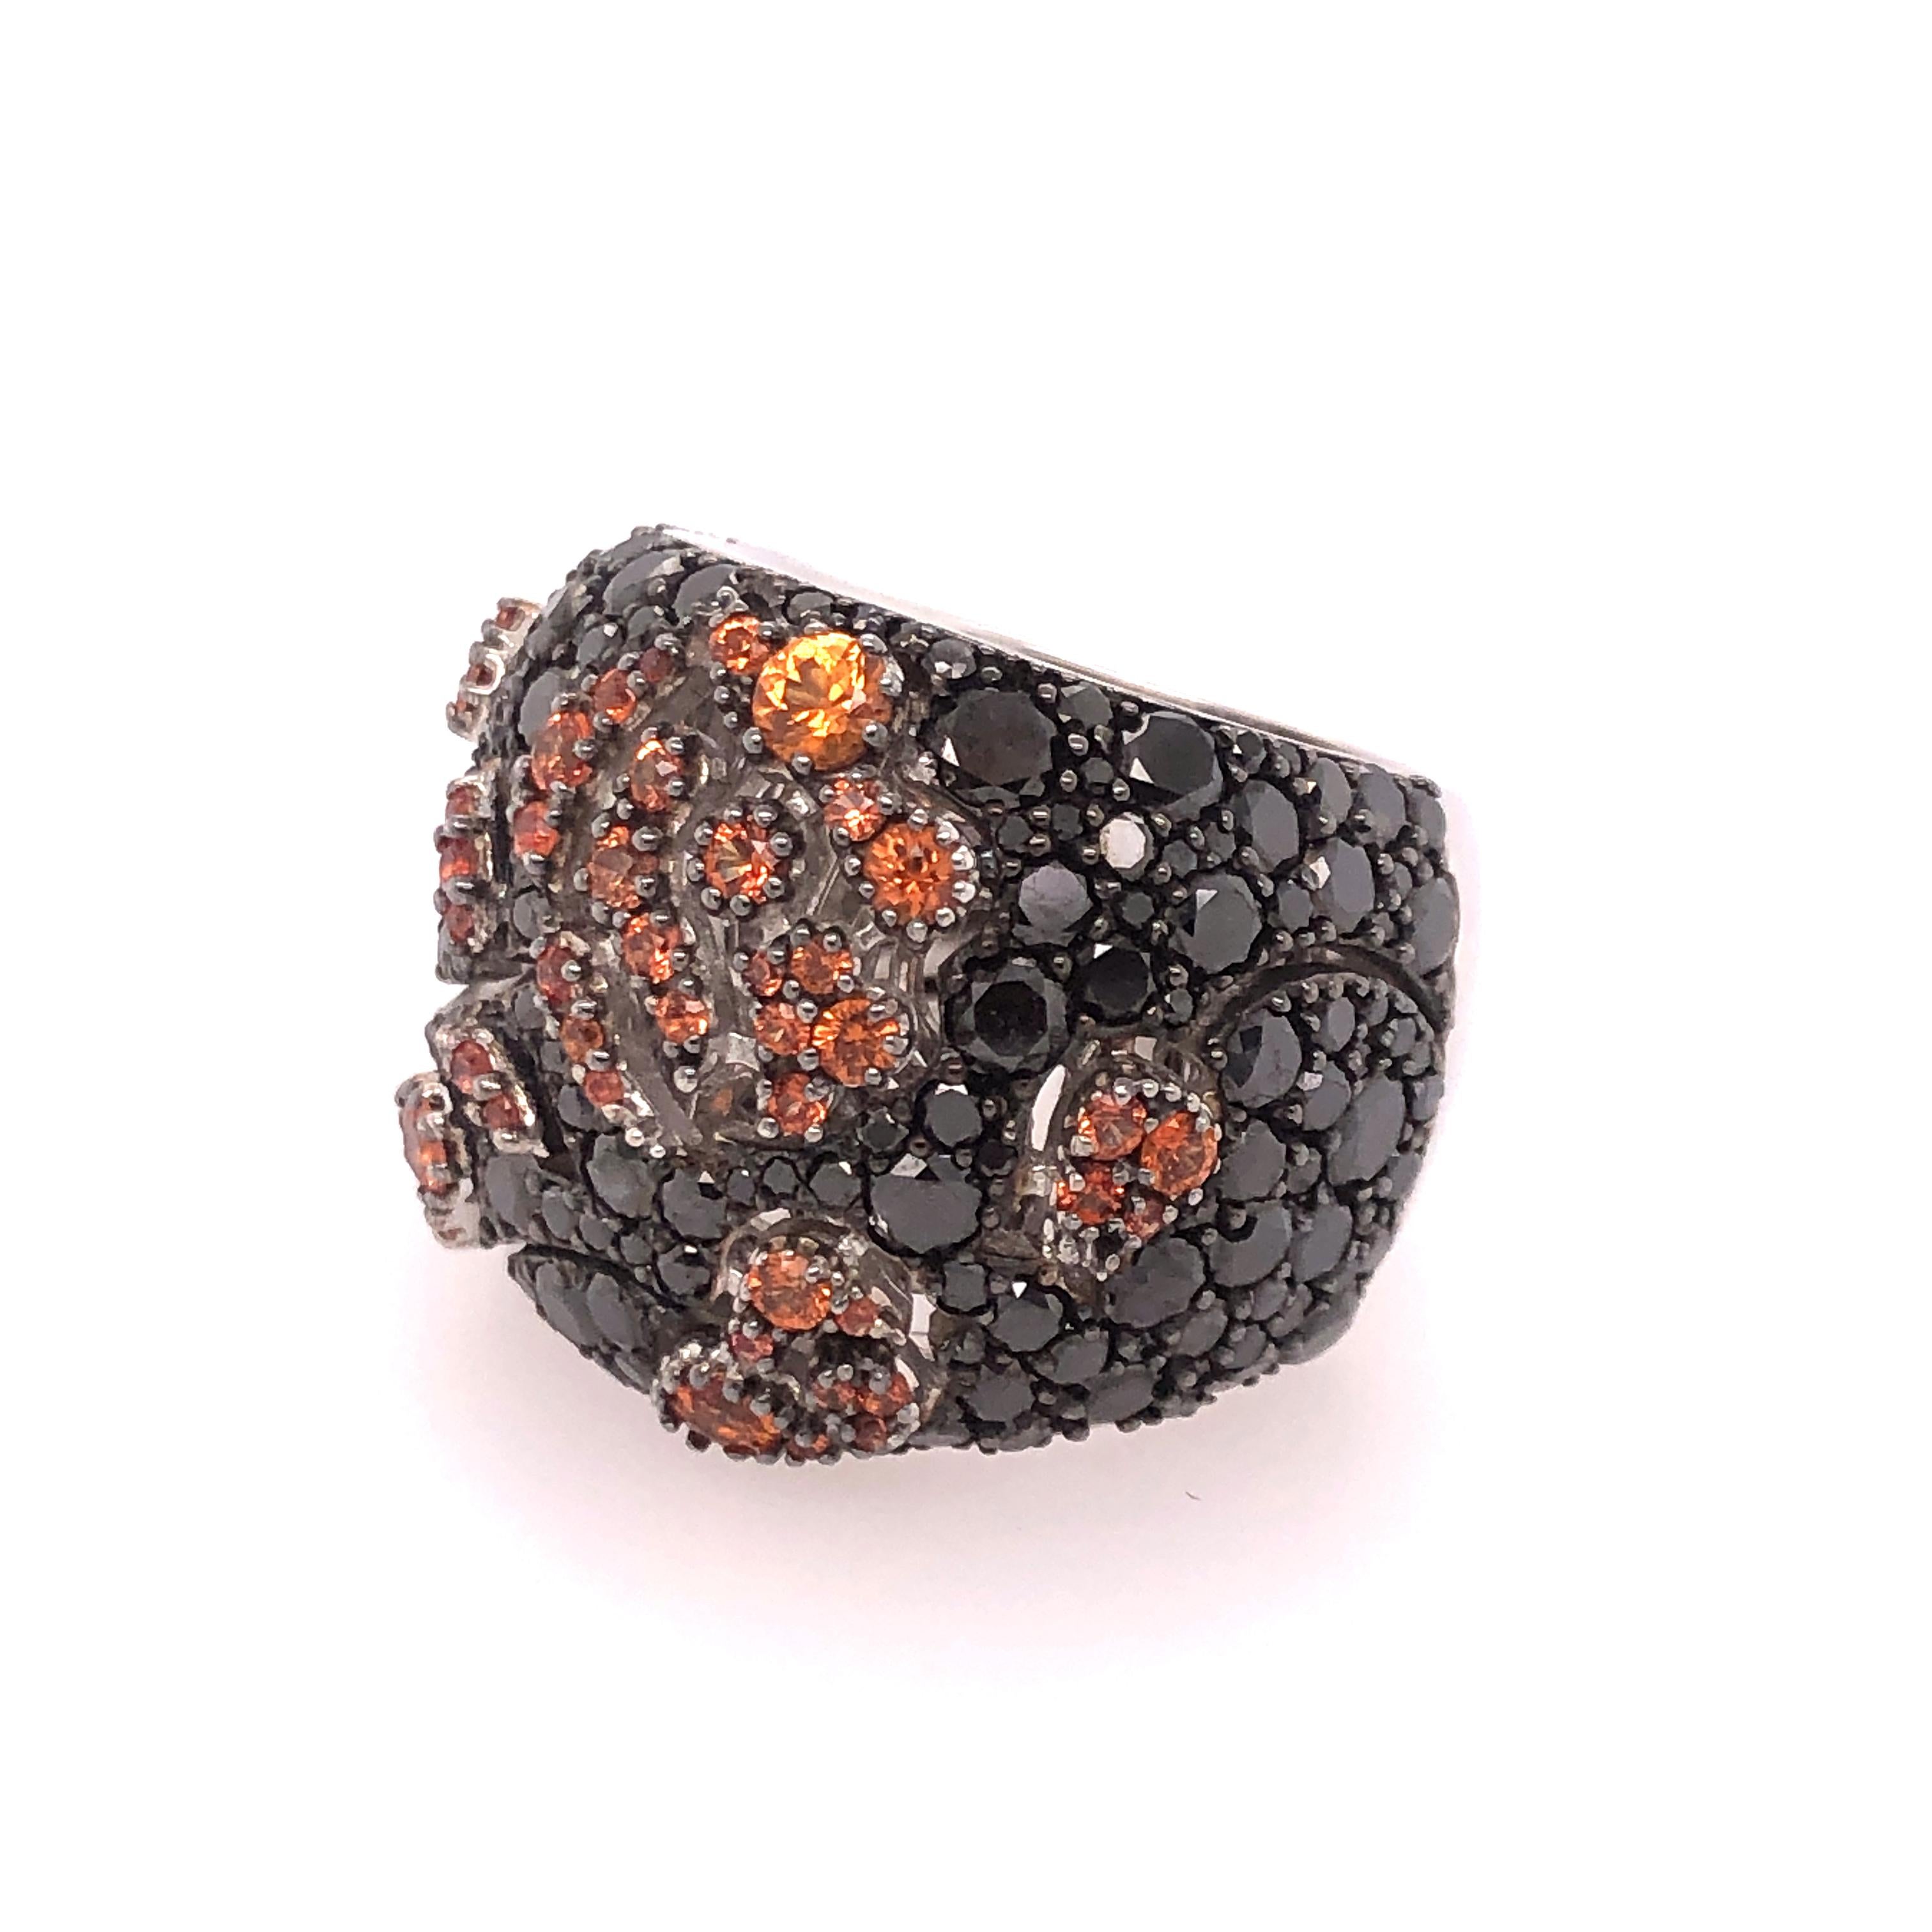 Dramatically designed by Stefan Hafner with the contrast of Black and Orange Sapphires this floral motif ring demands to be worn. 
Orange Sapphires create the illusion of flowers across the deep background of black sapphires. The negative spaces in